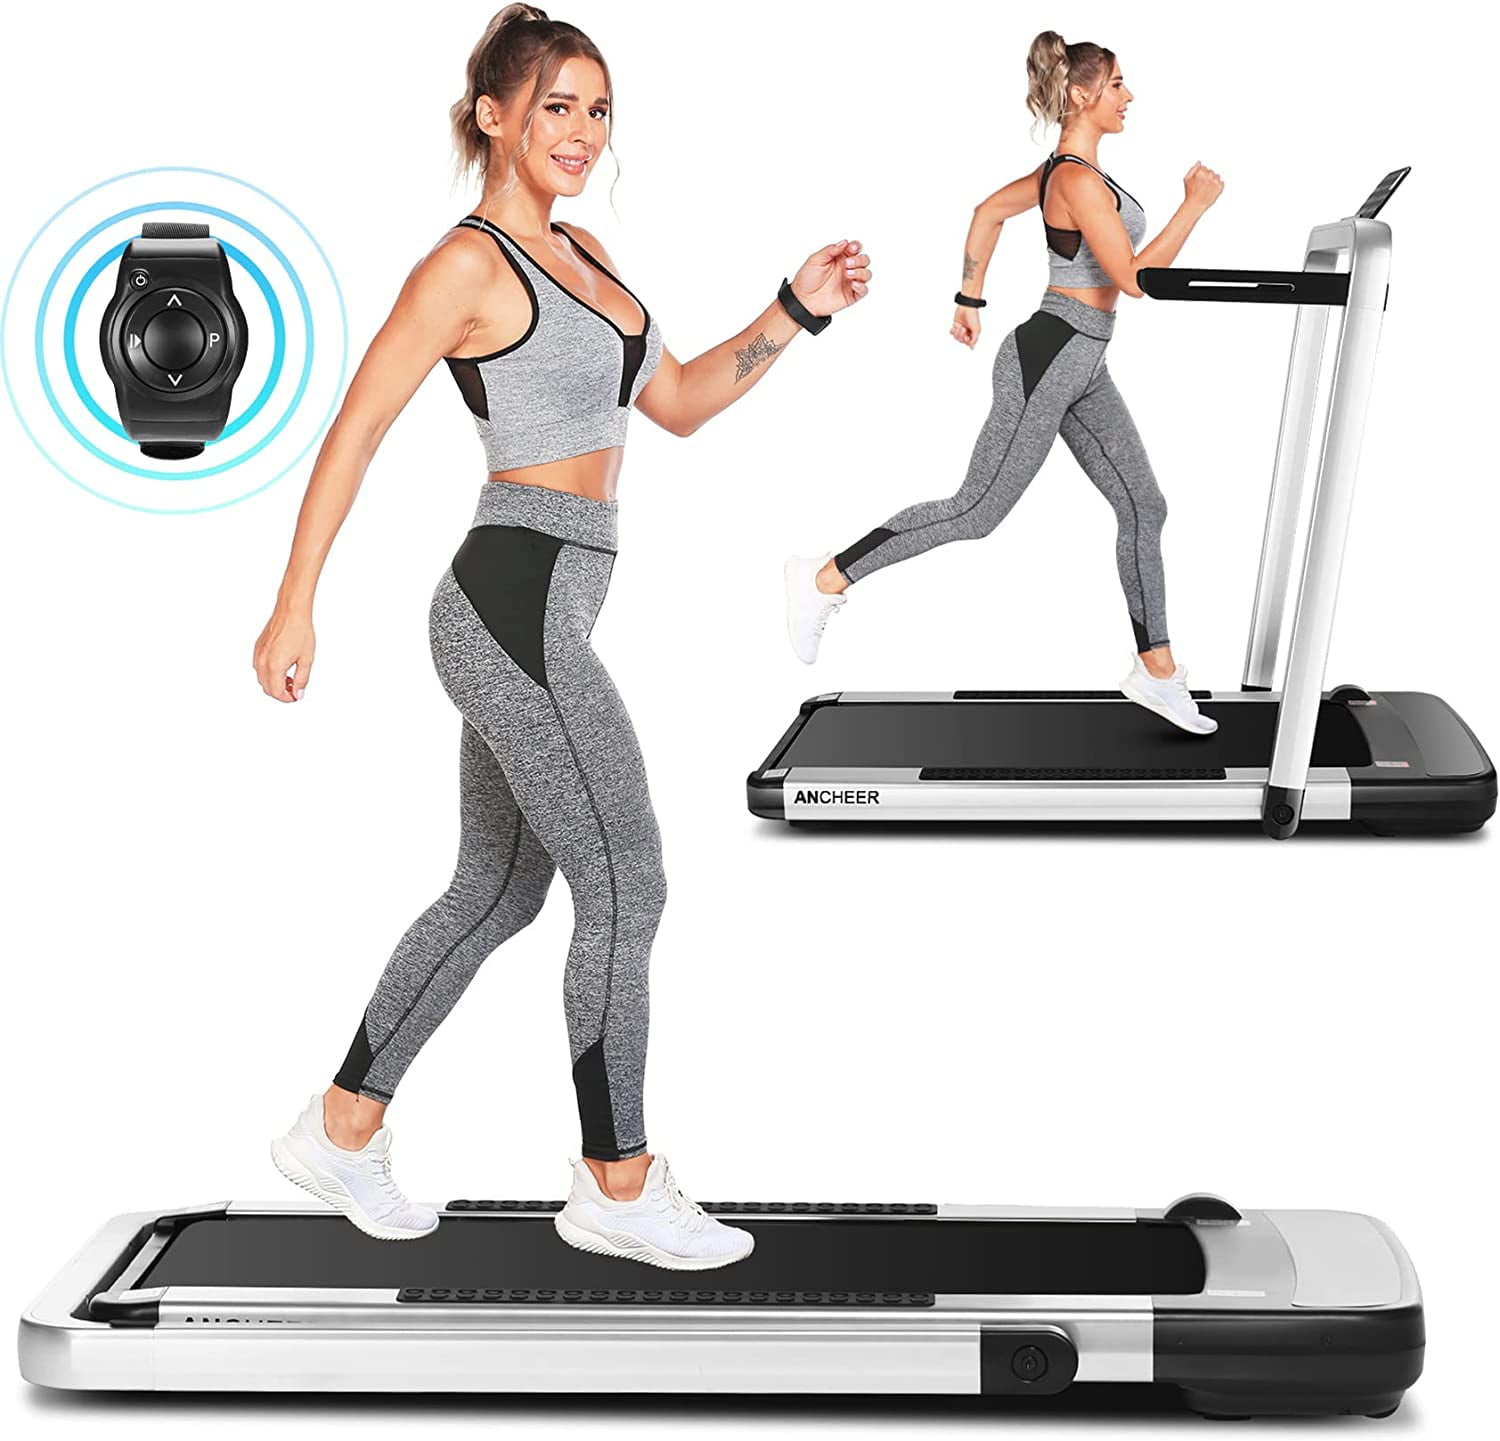 FUNMILY 2 in 1 Folding Treadmill Portable Under Desk Treadmill 265lbs Capacity Silver Installation-Free Electric Running Walking Machine for Home Office Workout 